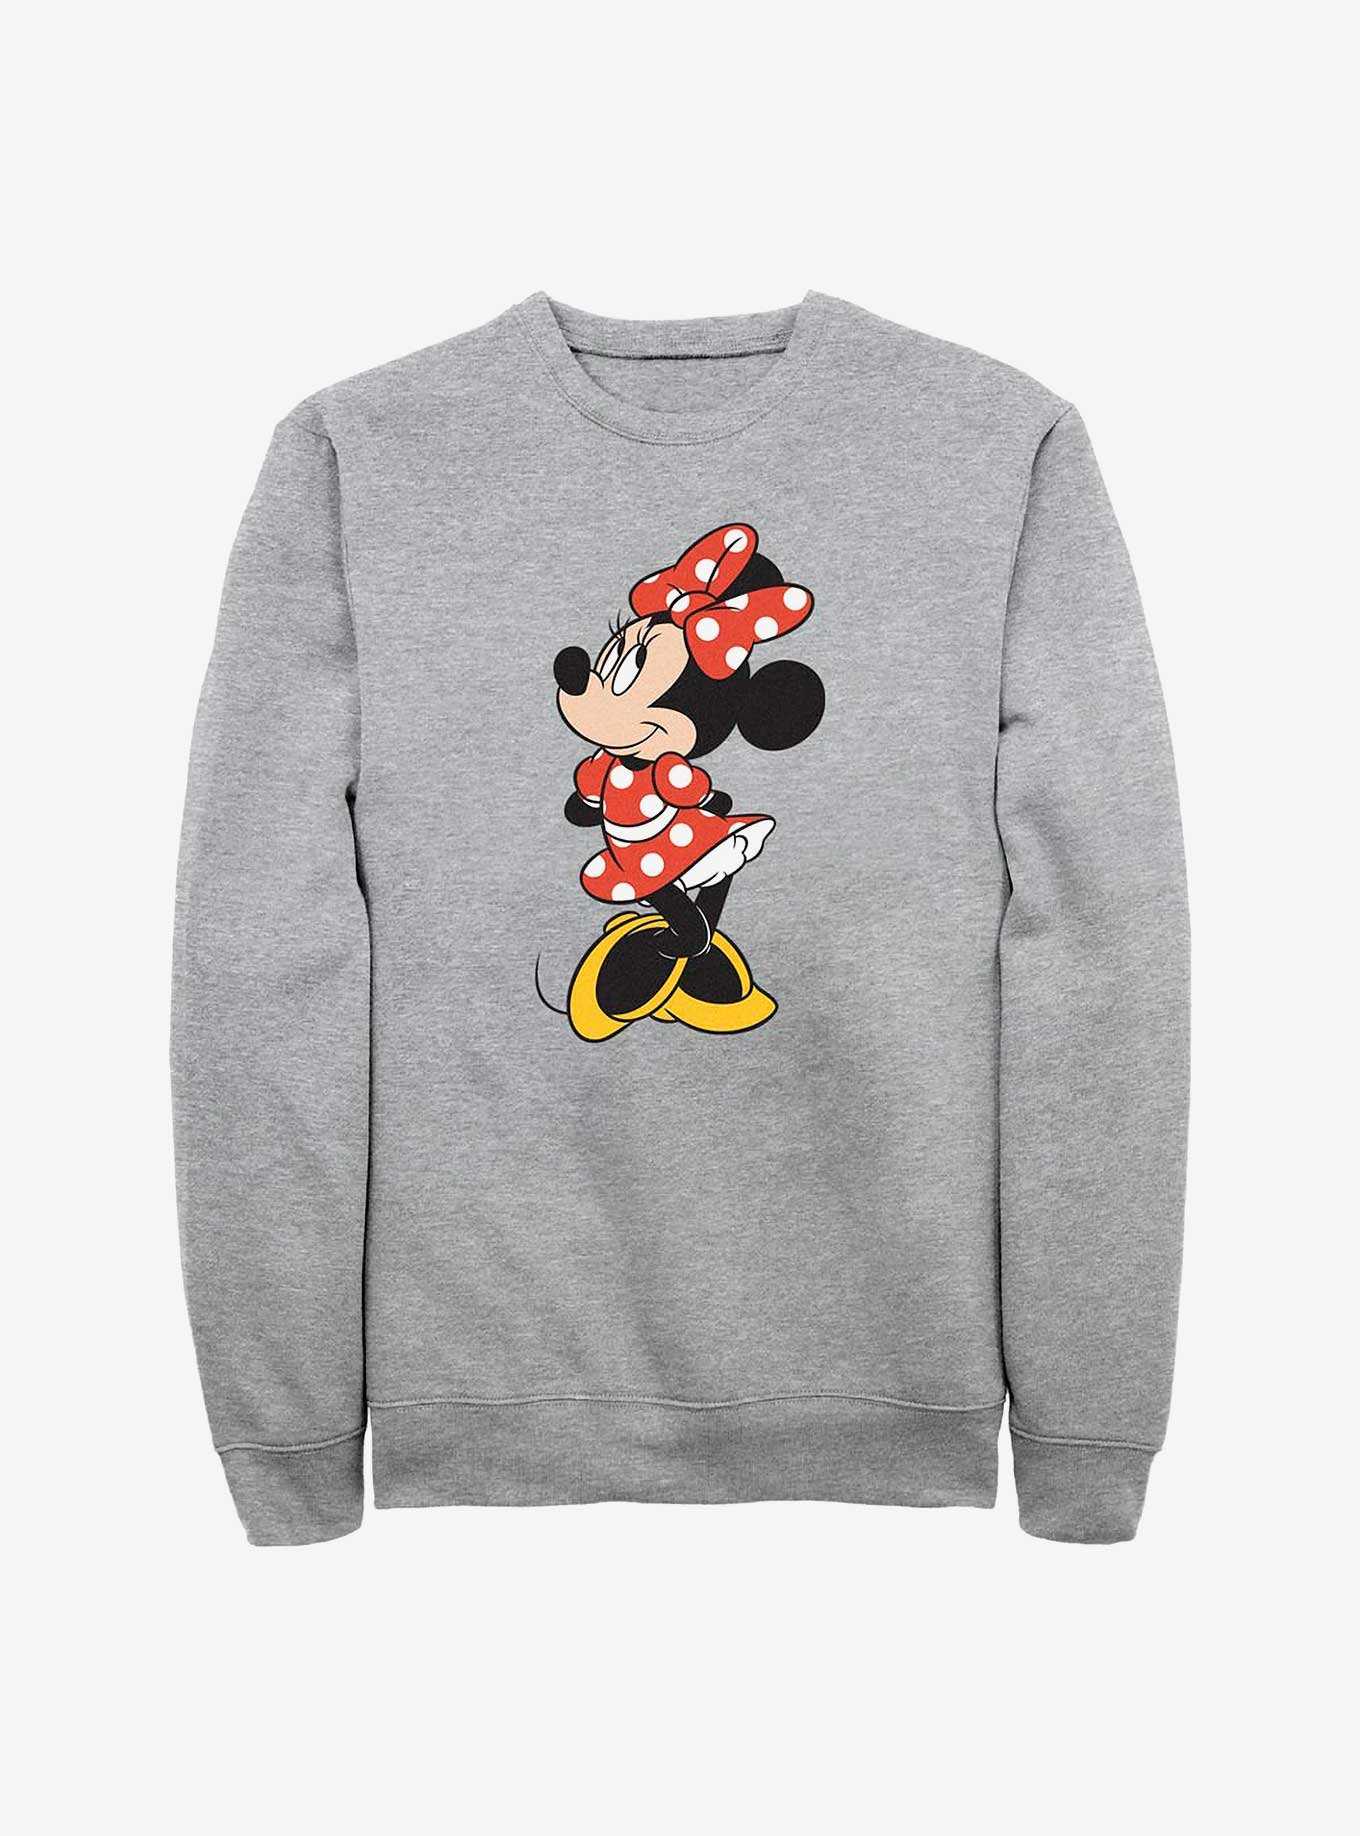 | Merchandise Mouse Minnie Shirts Hot Topic & OFFICIAL